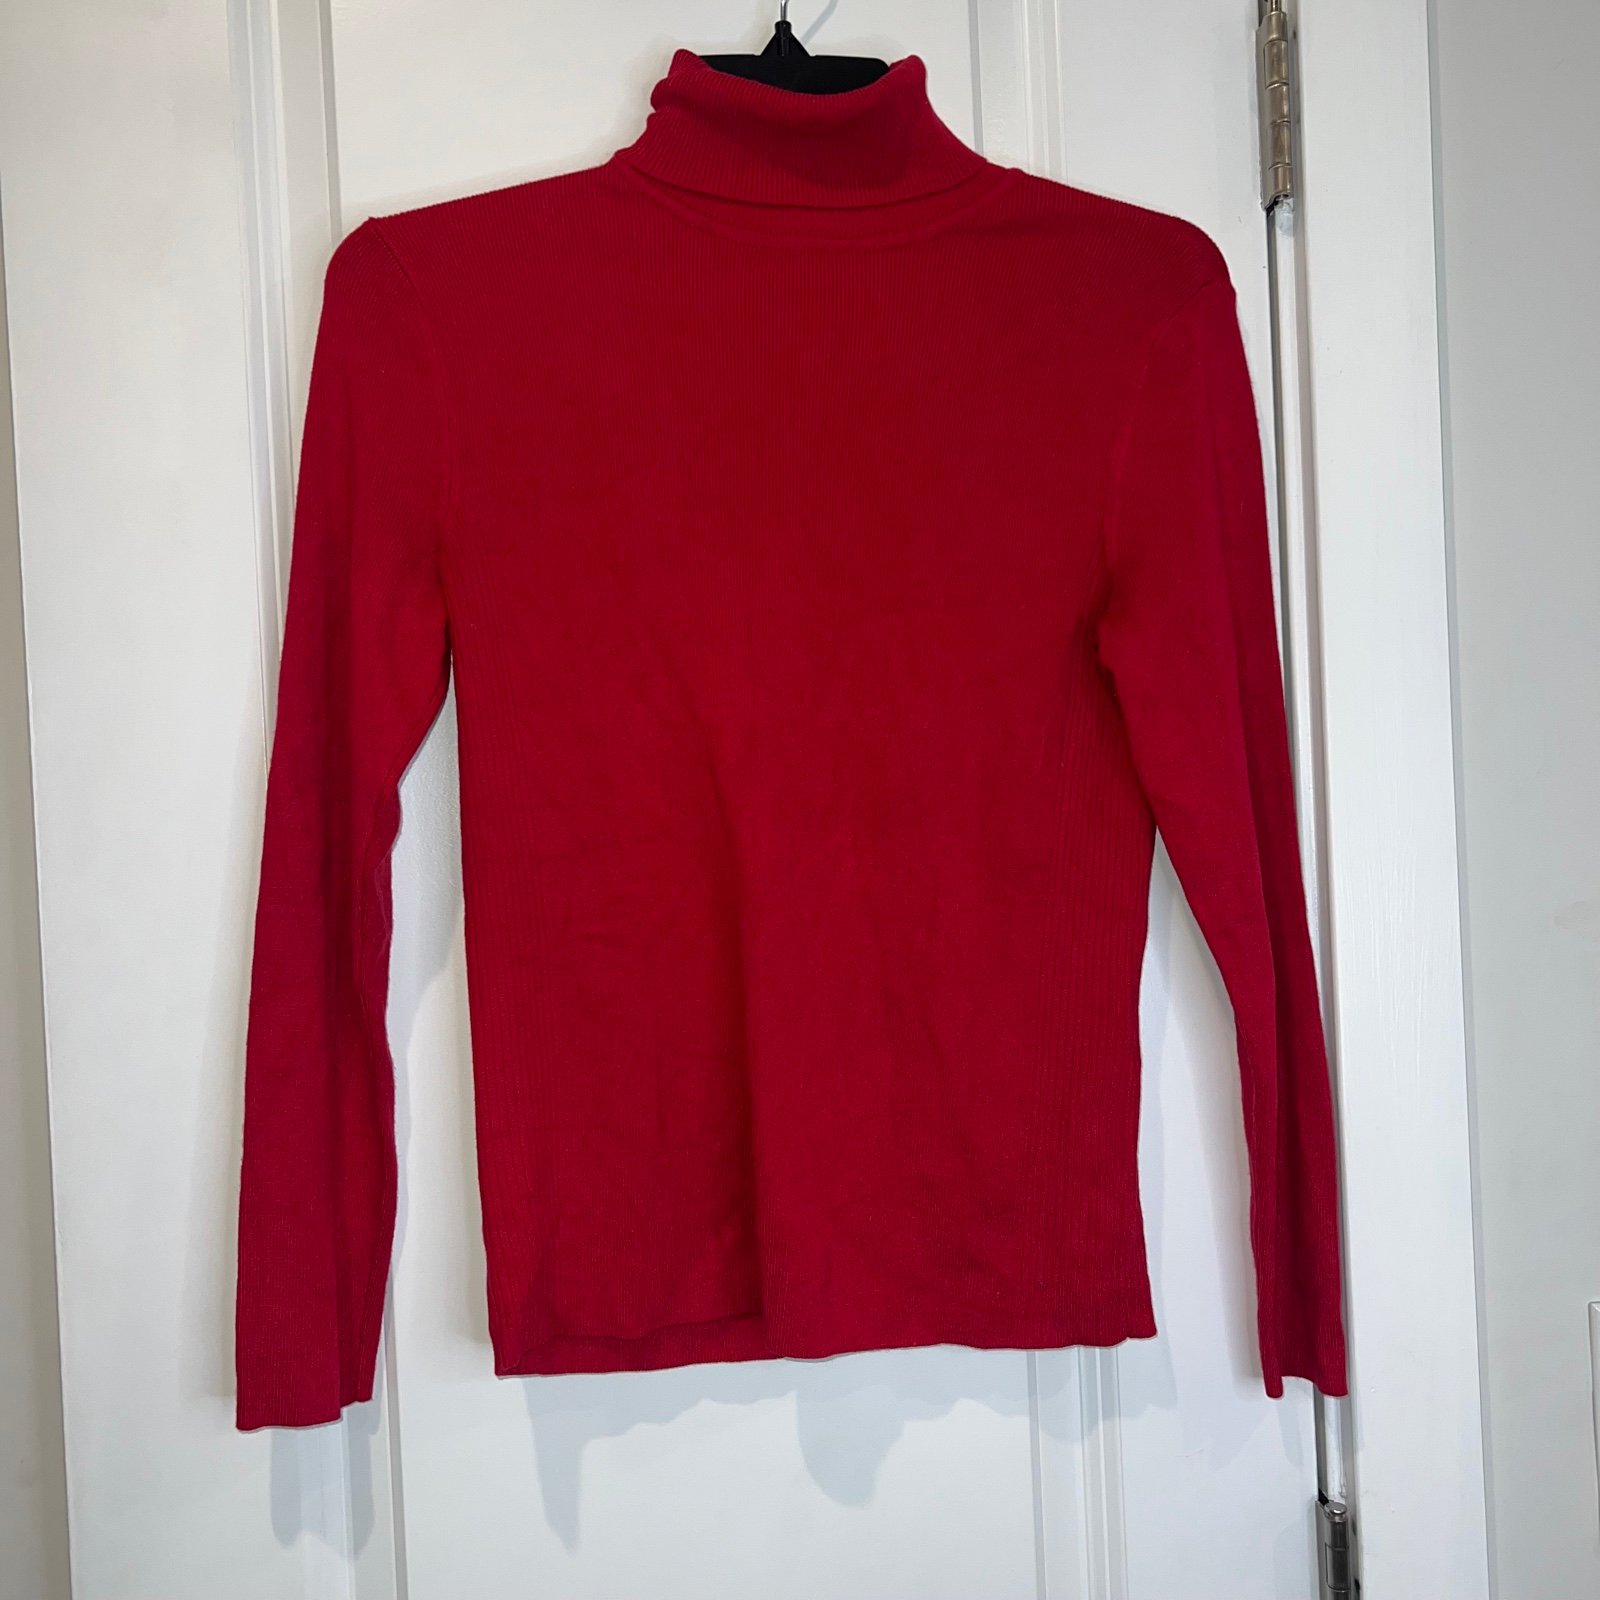 Personality Chicos Womens Red Turtleneck Sweater KvbaS0